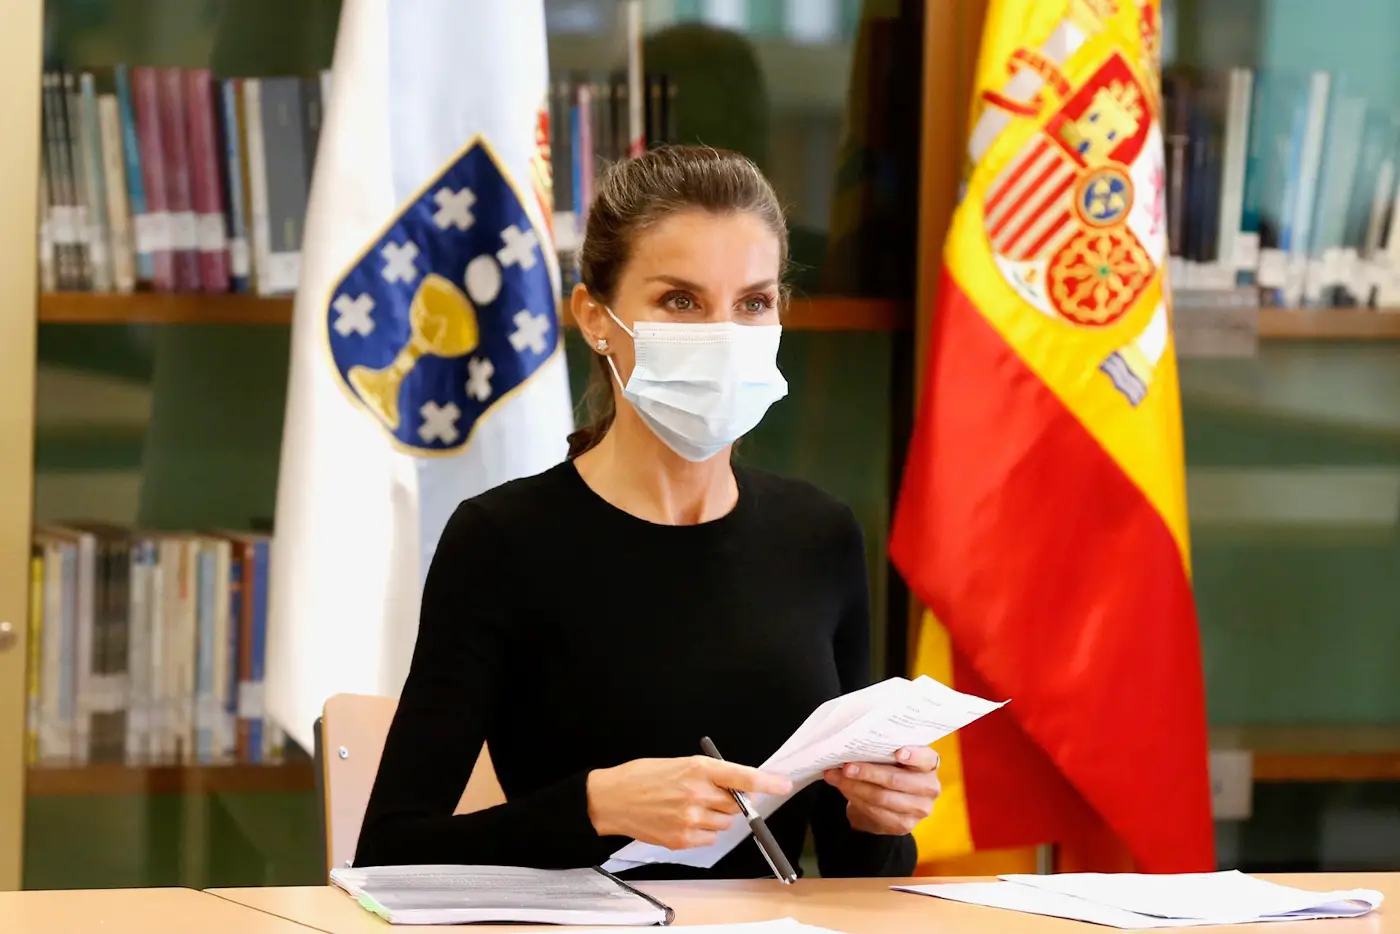 Queen Letizia of Spain at the vocational training center